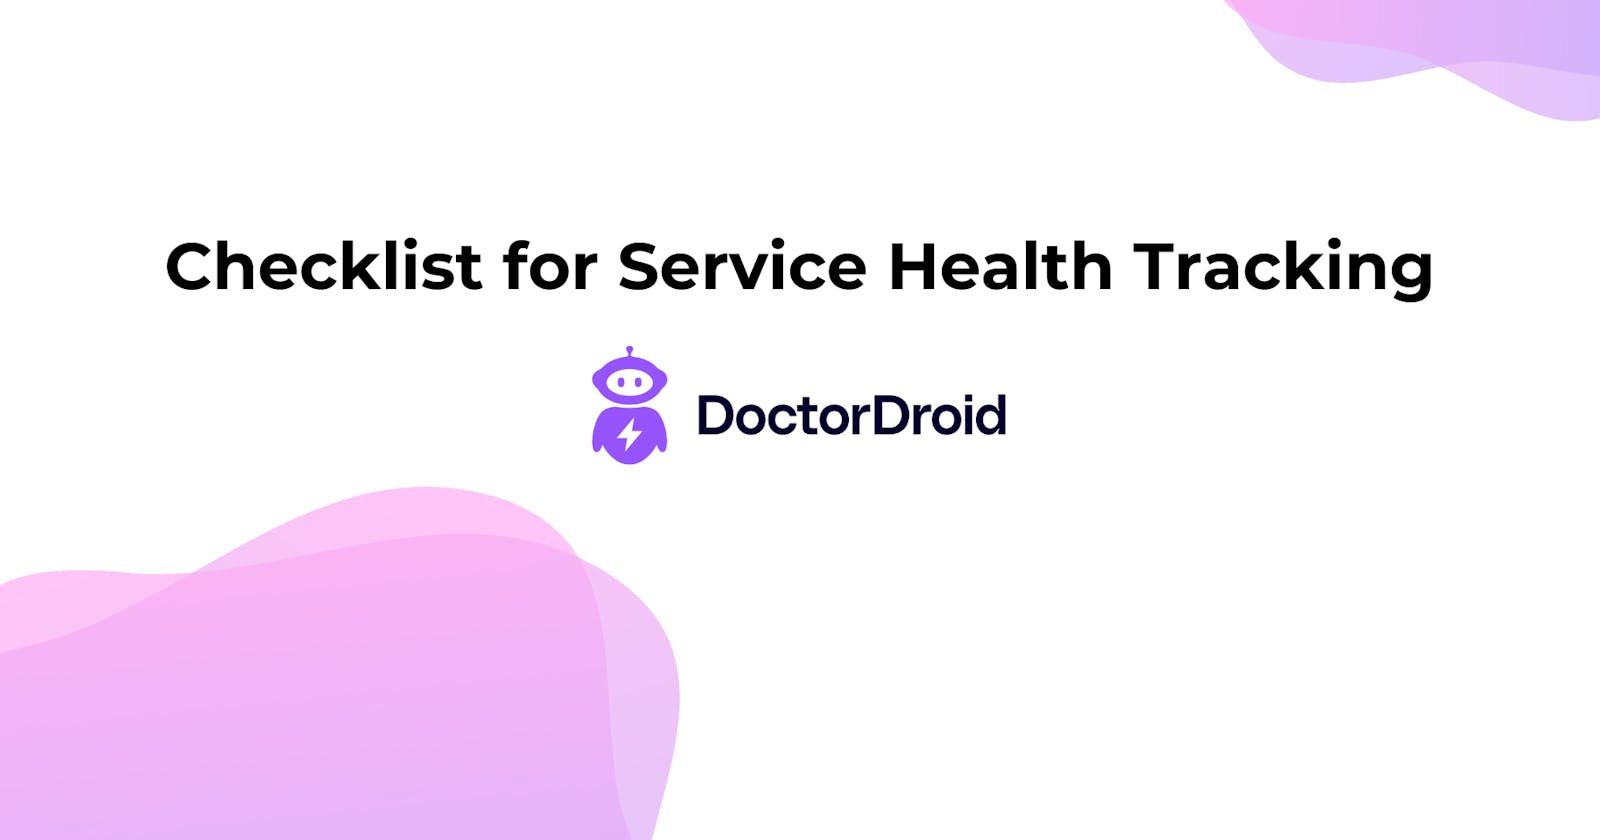 Checklist for Service Health Tracking